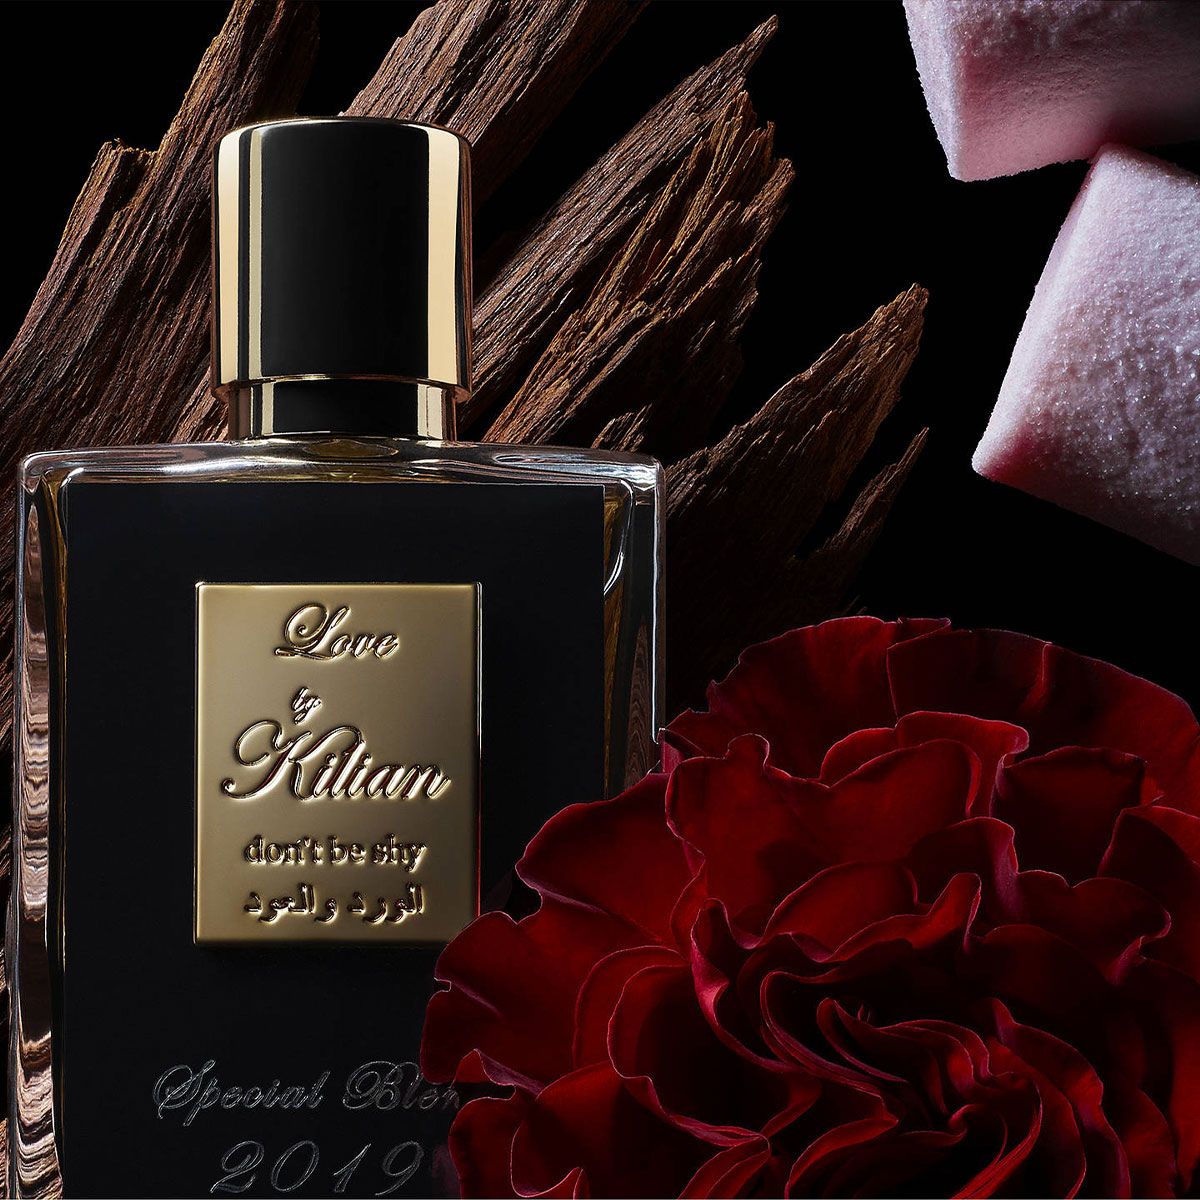  Love By Kilian Don’t Be Shy Rose and Oud 